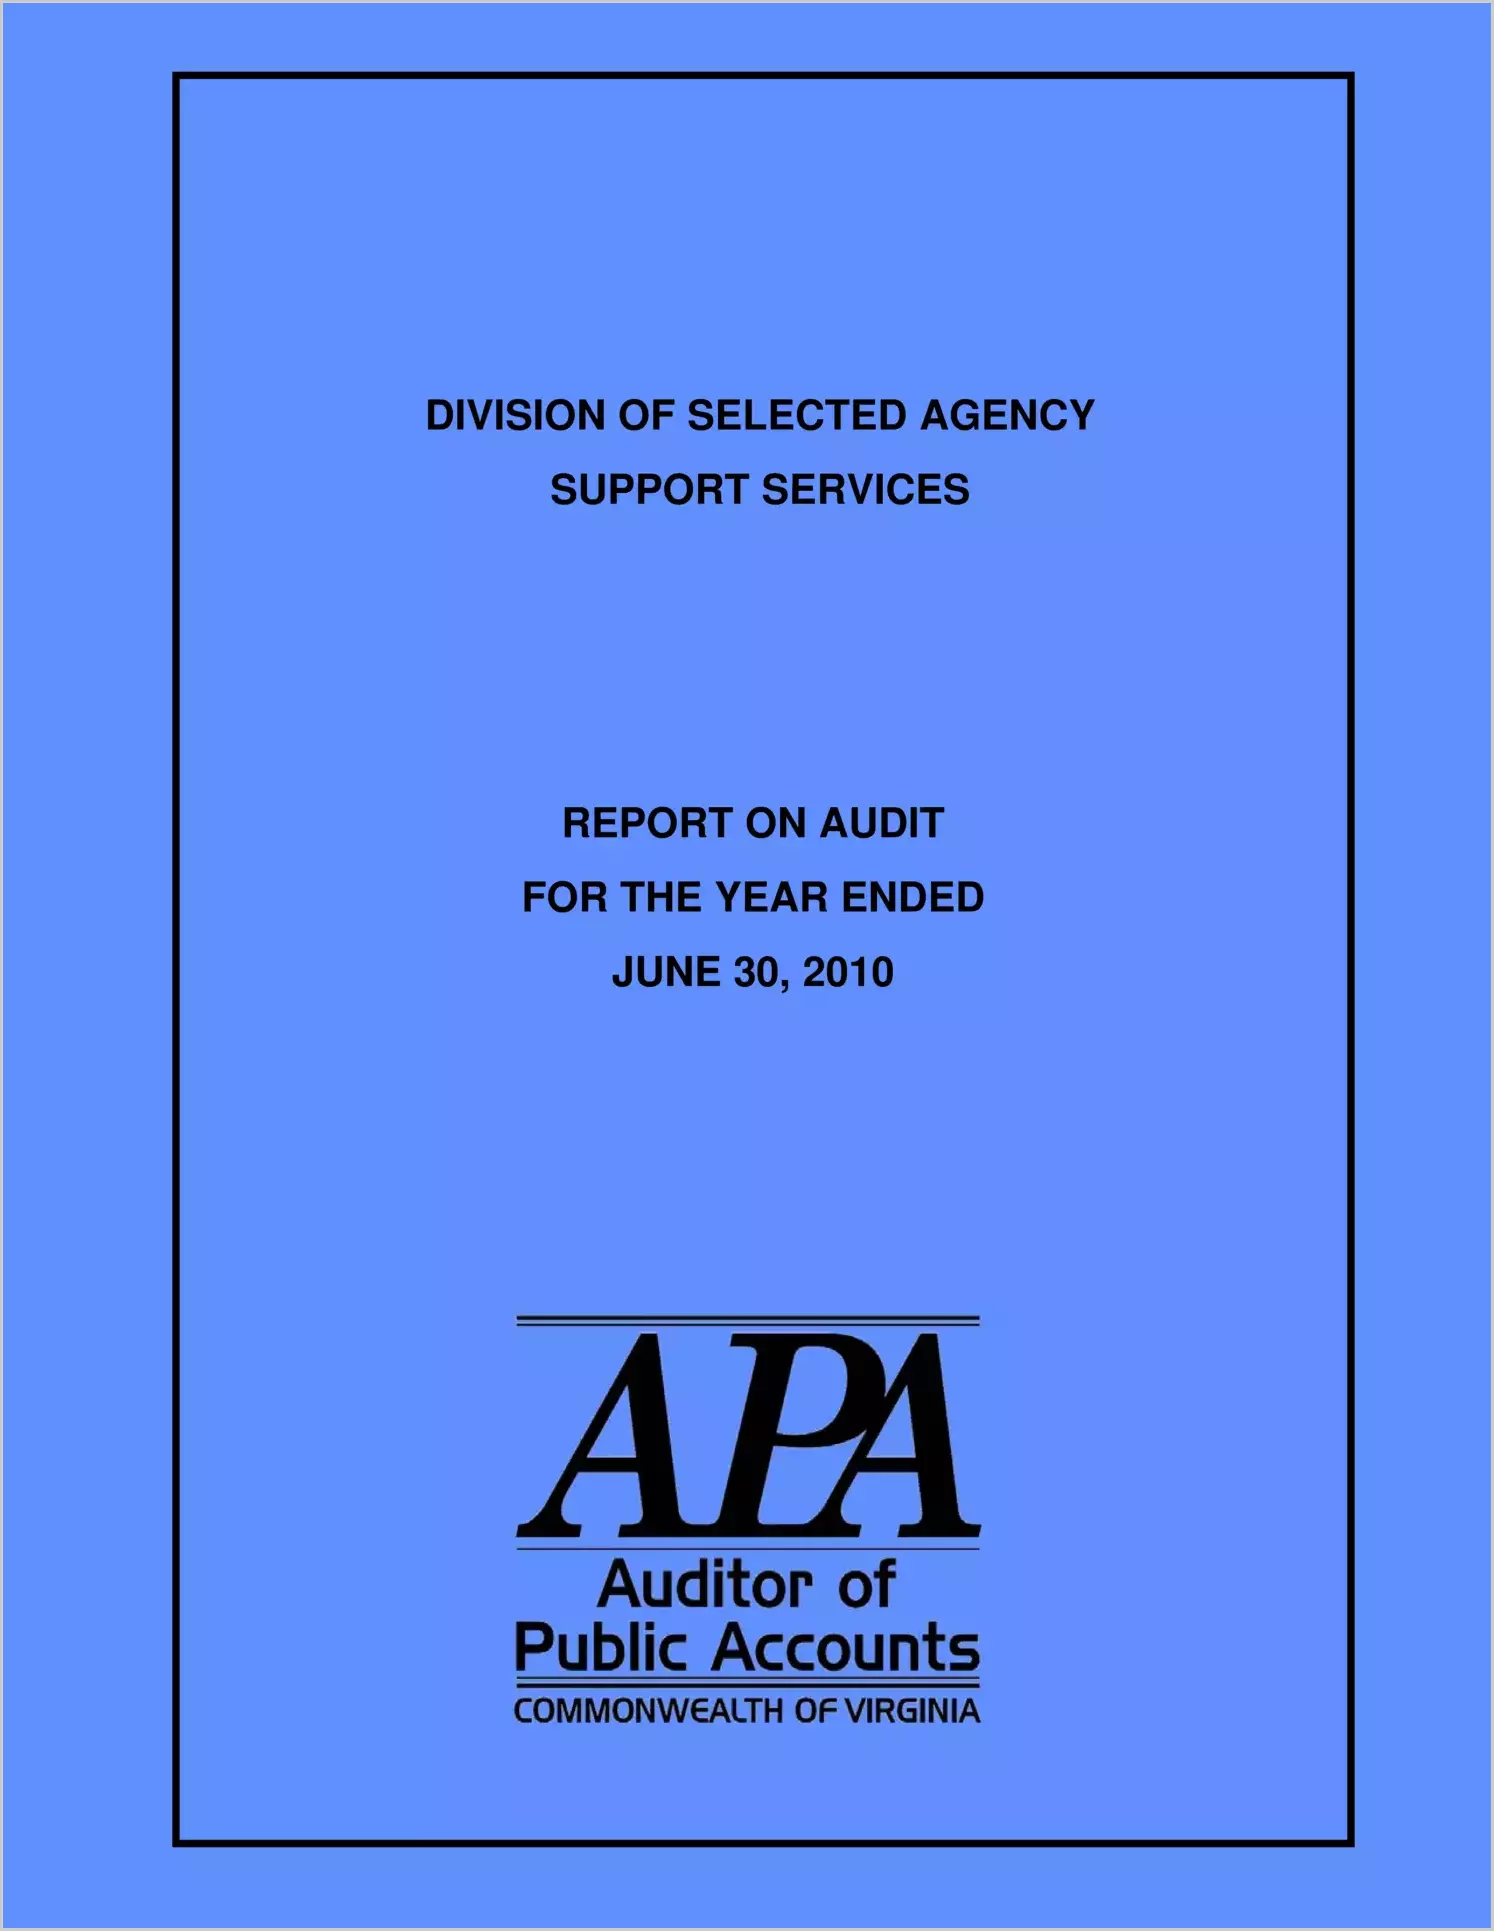 Division of Selected Agency Support Services for the year ended June 30, 2010